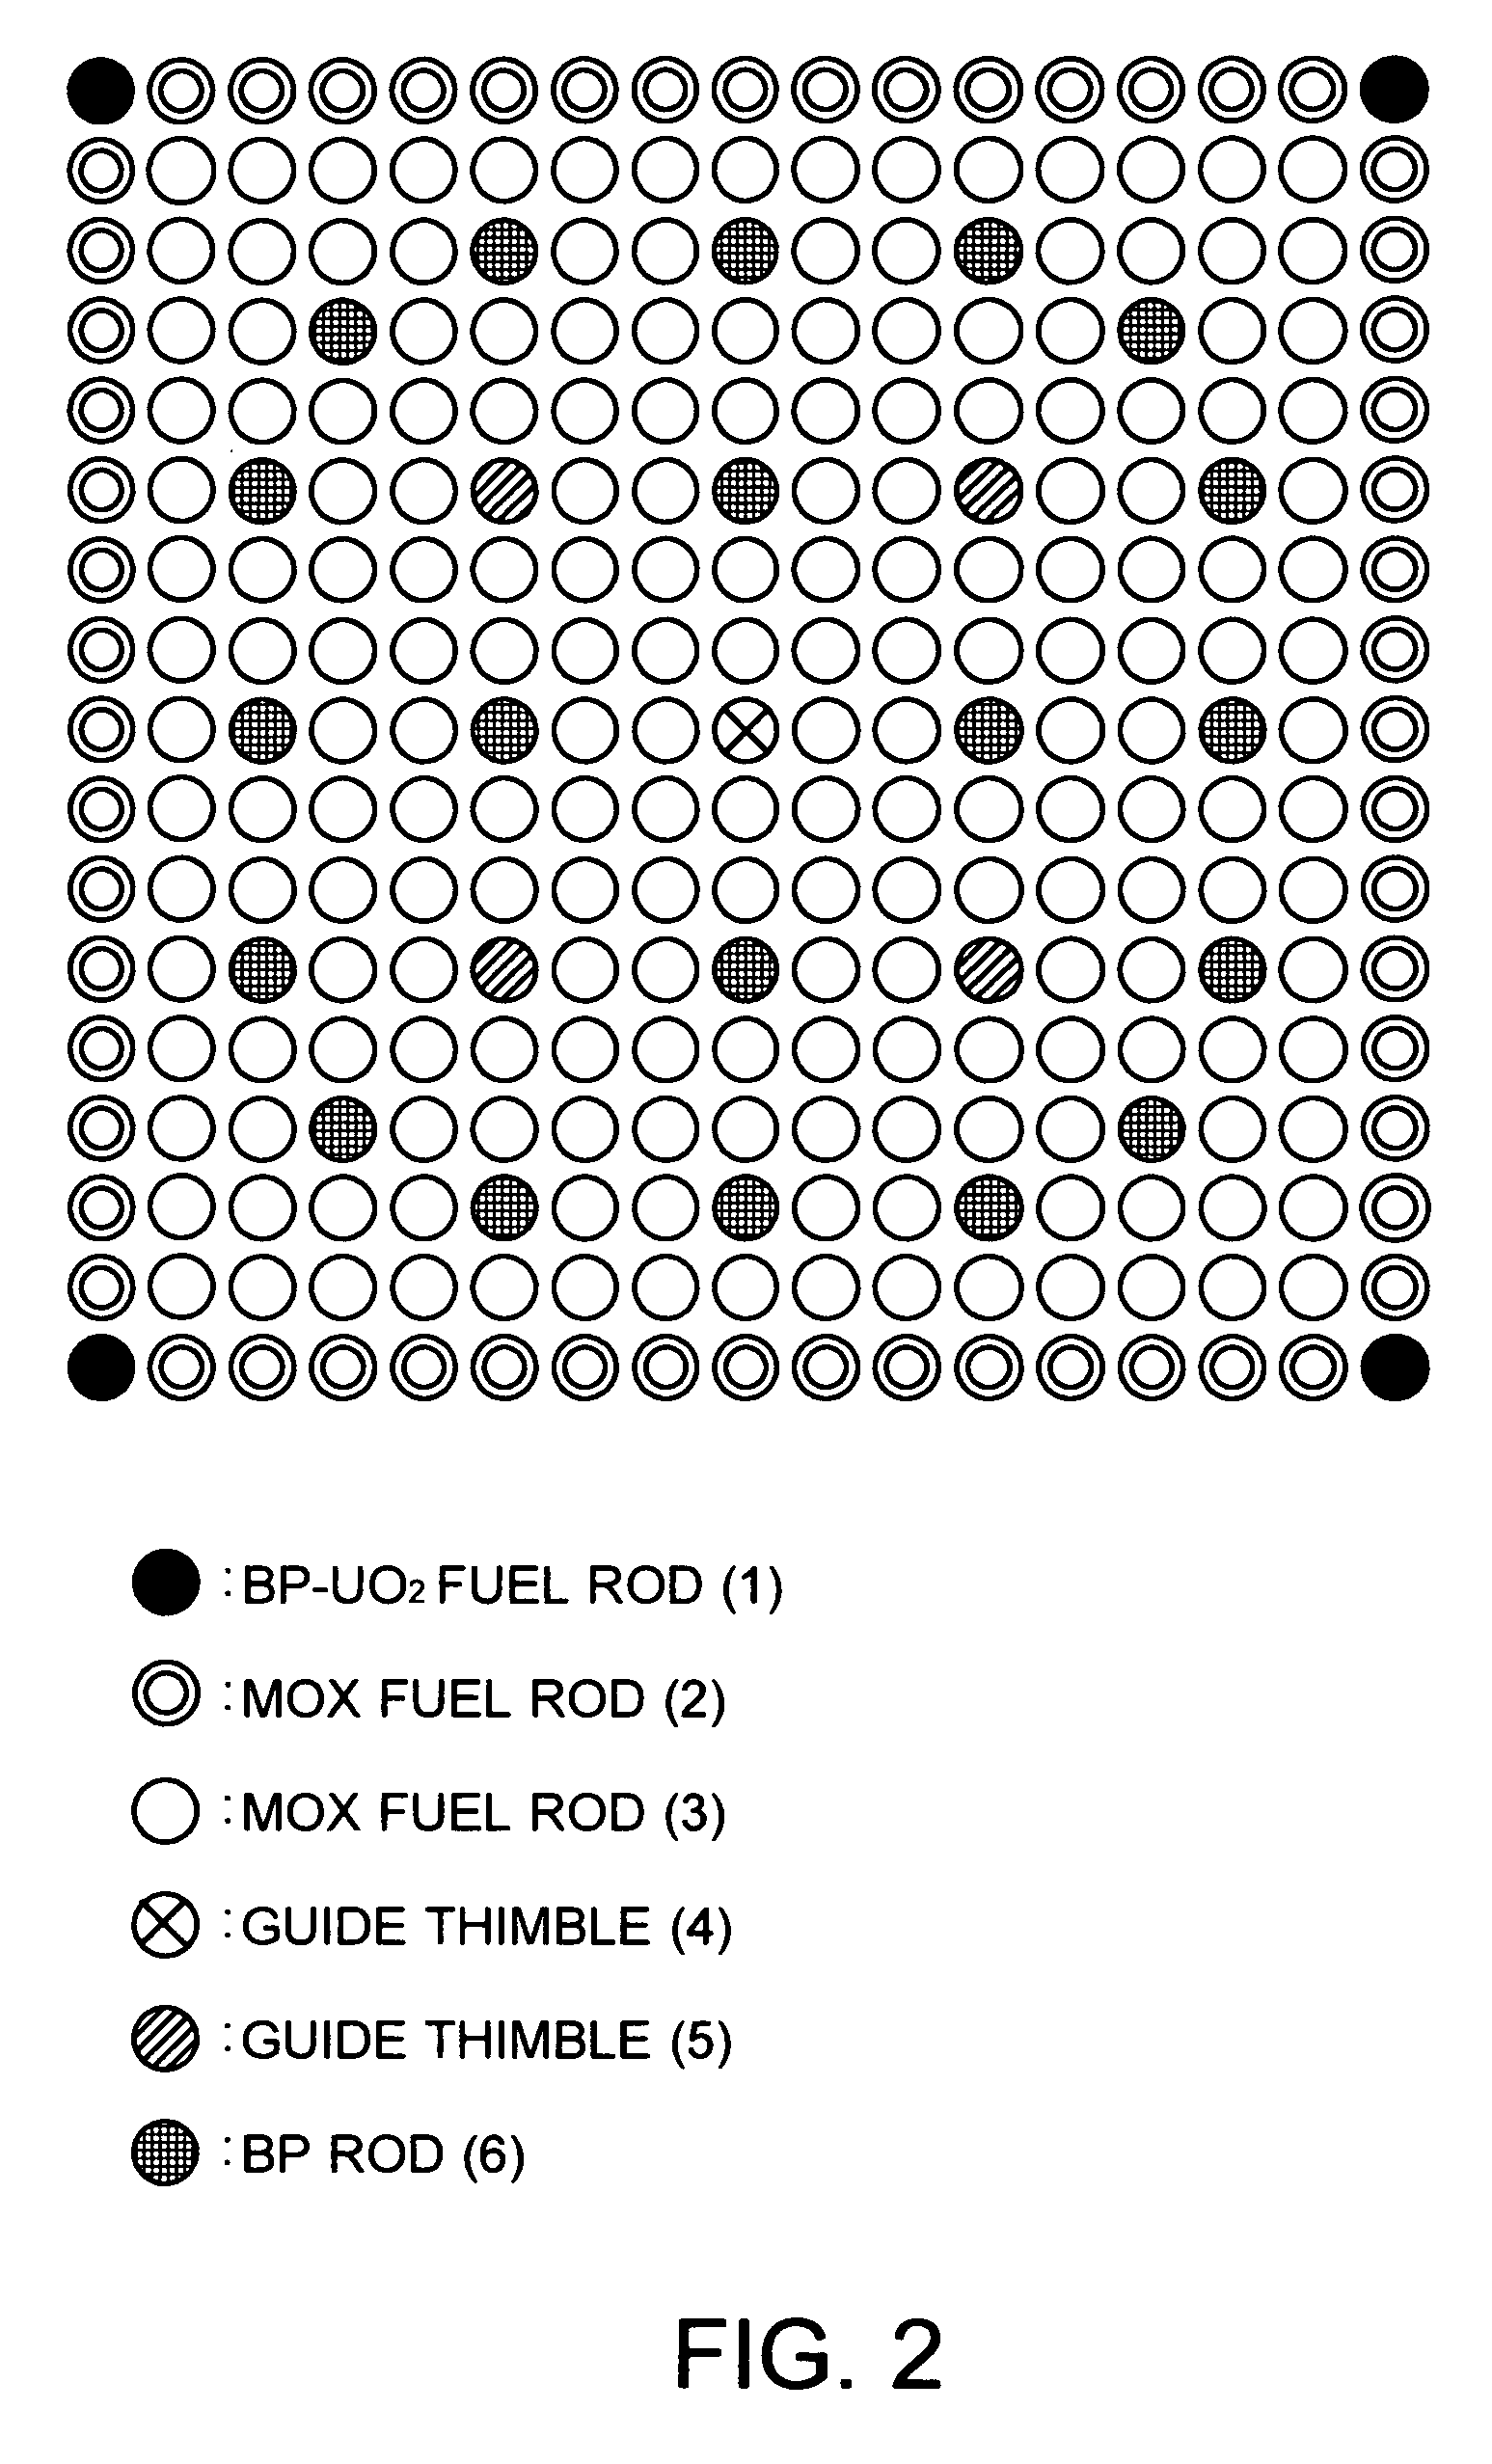 Mox fuel assembly for pressurized water reactors